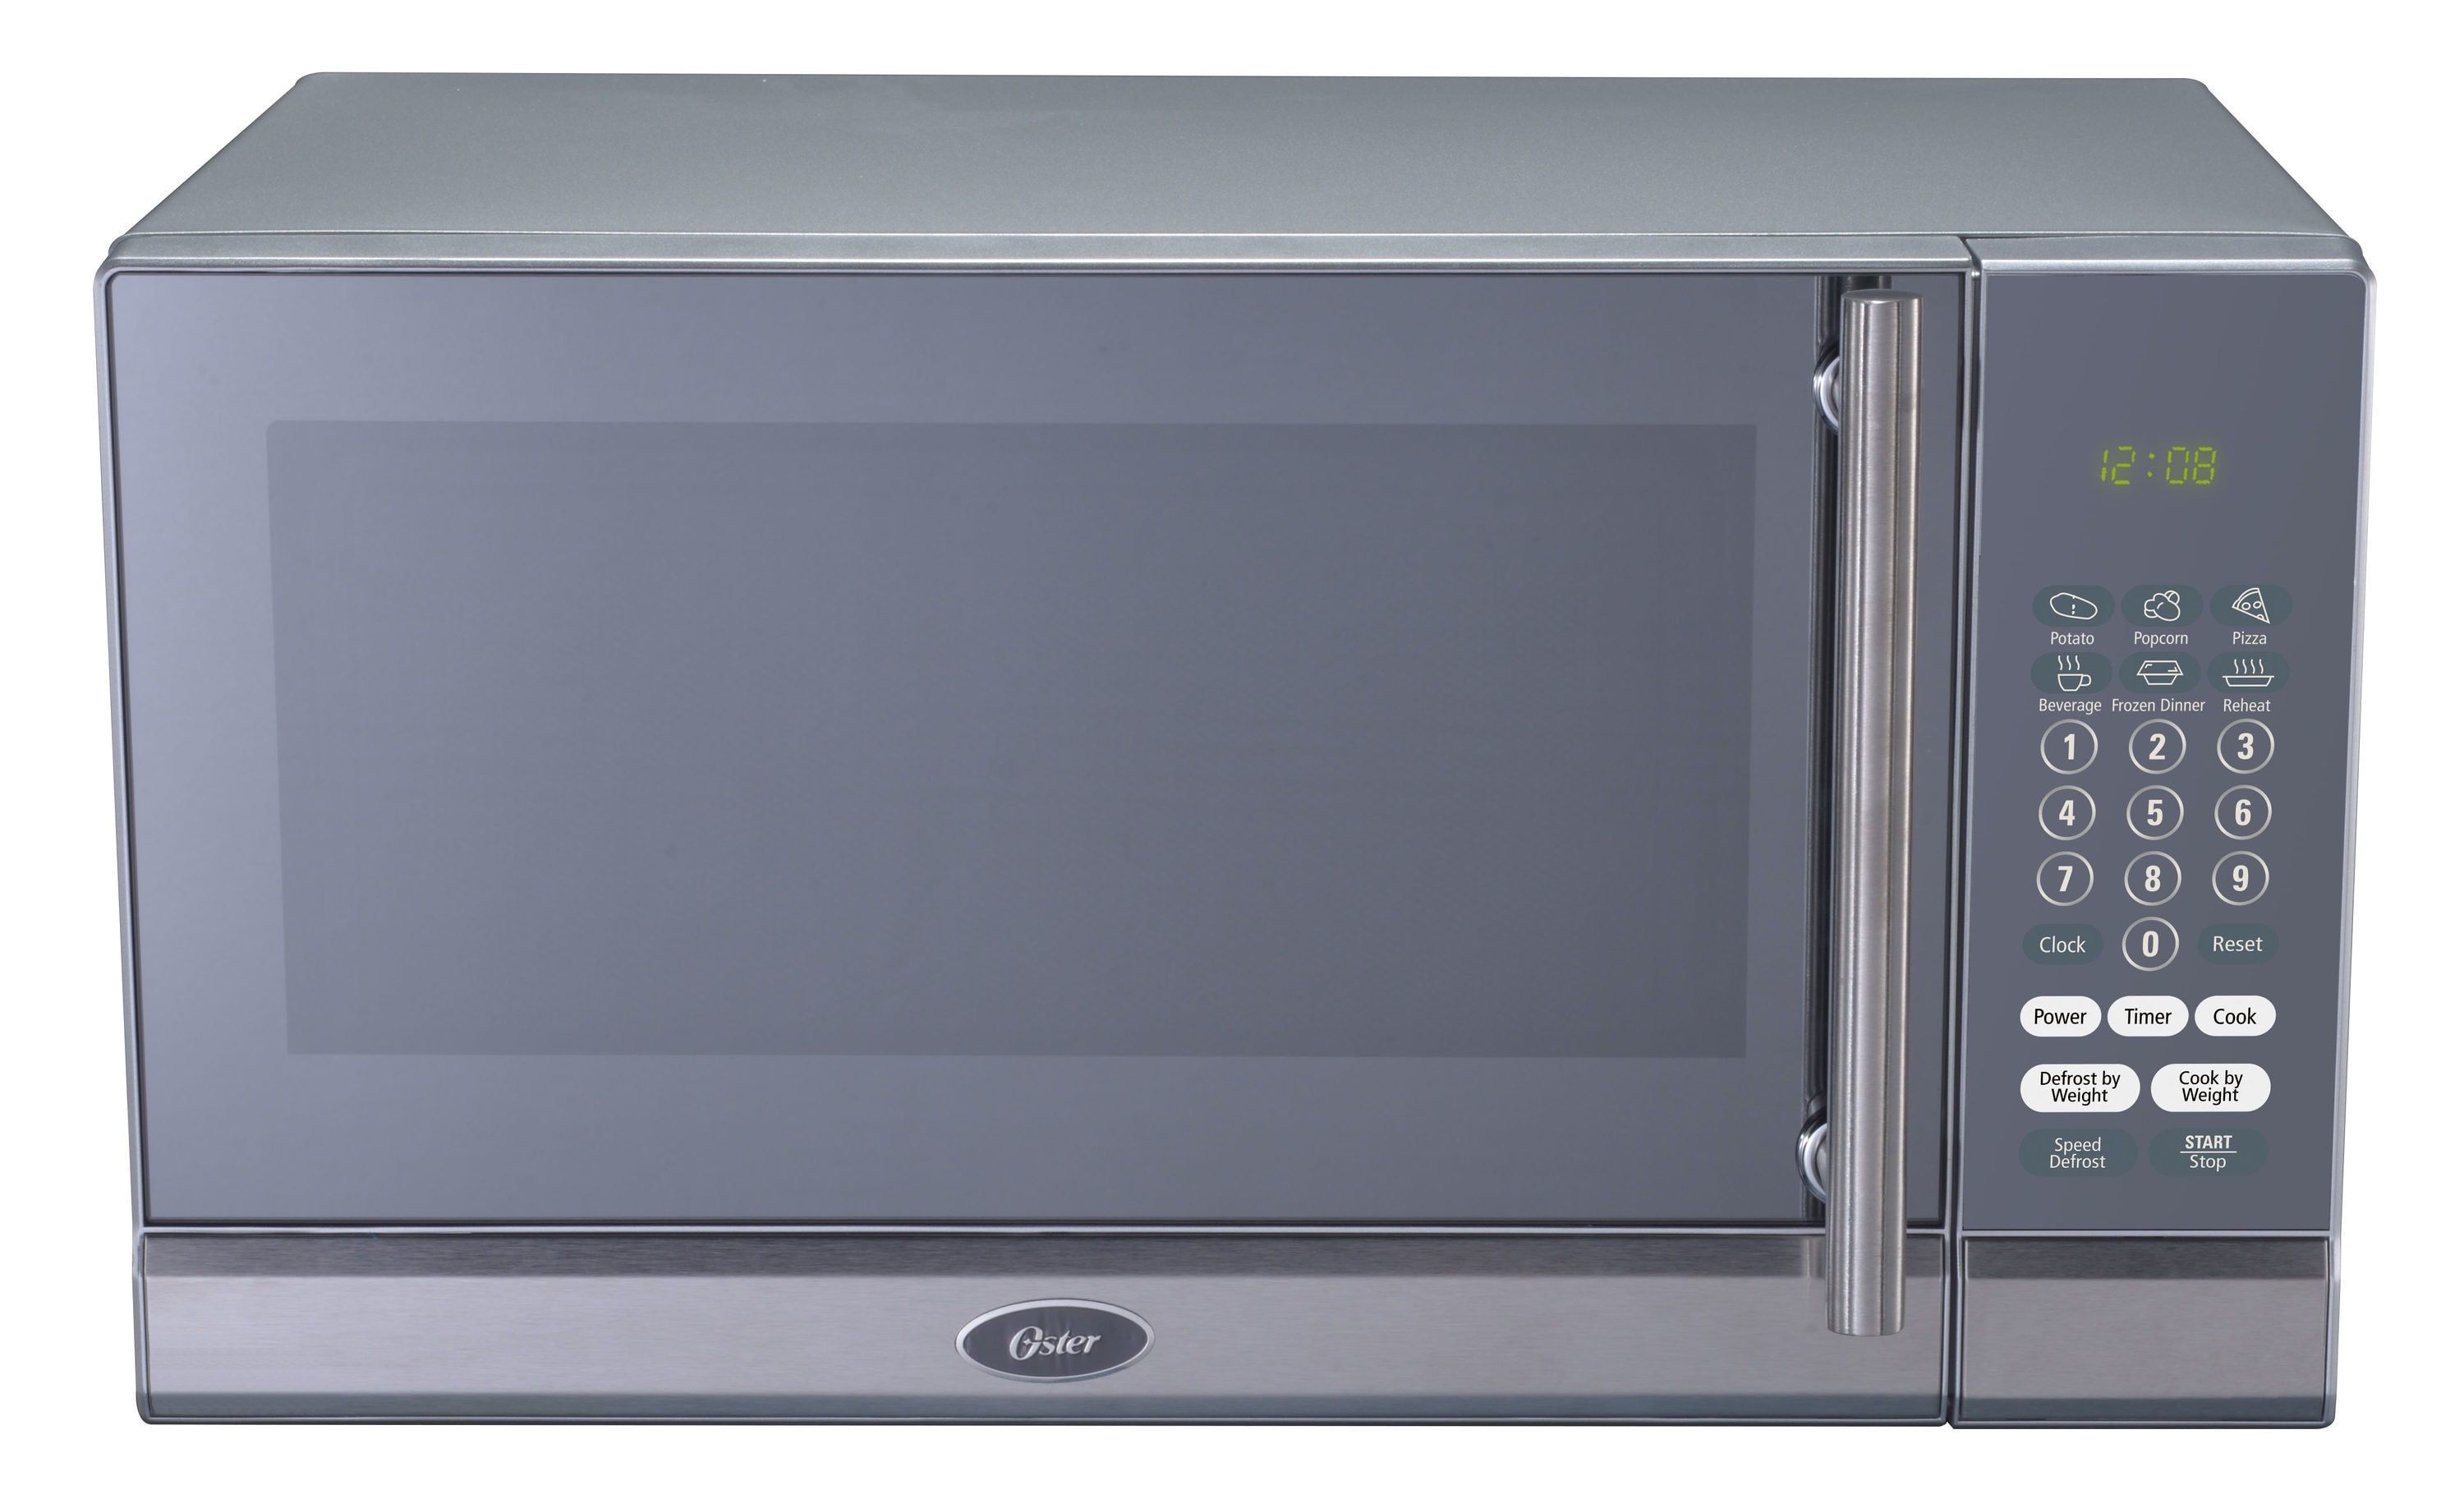 Horno Microondas Oster 45L POGYME1502G Gris – INCHE